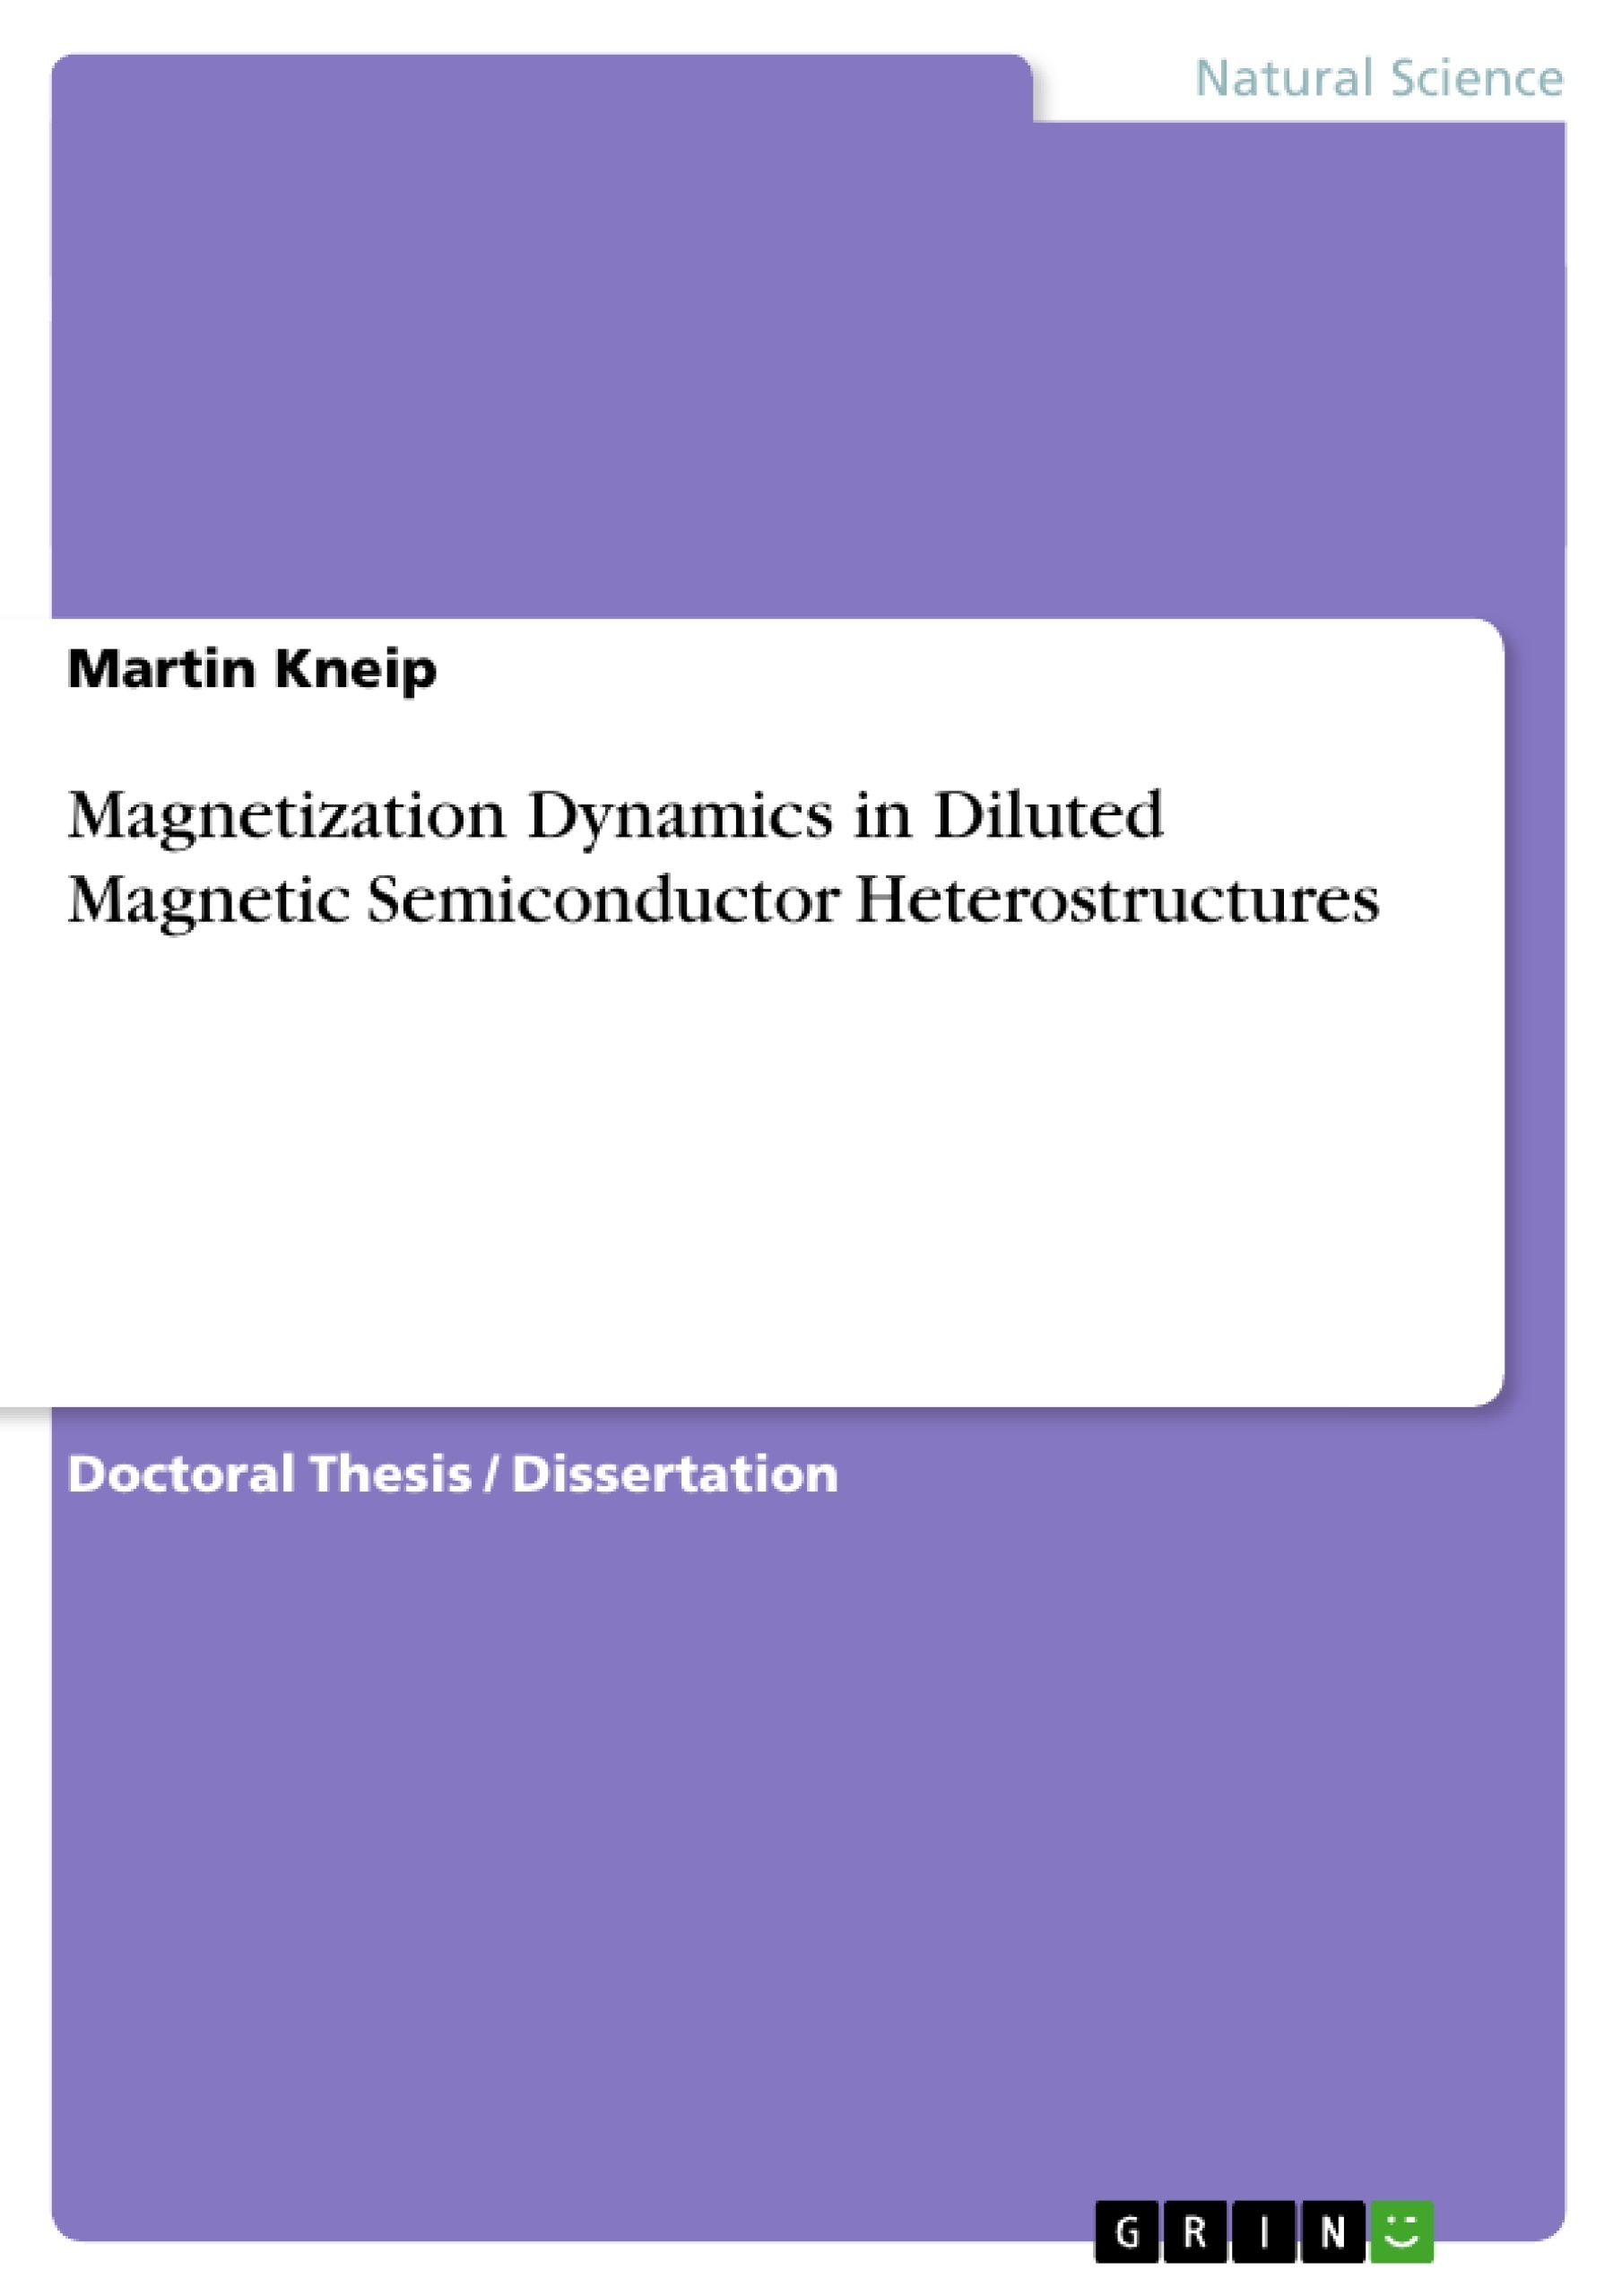 Title: Magnetization Dynamics in Diluted Magnetic Semiconductor Heterostructures